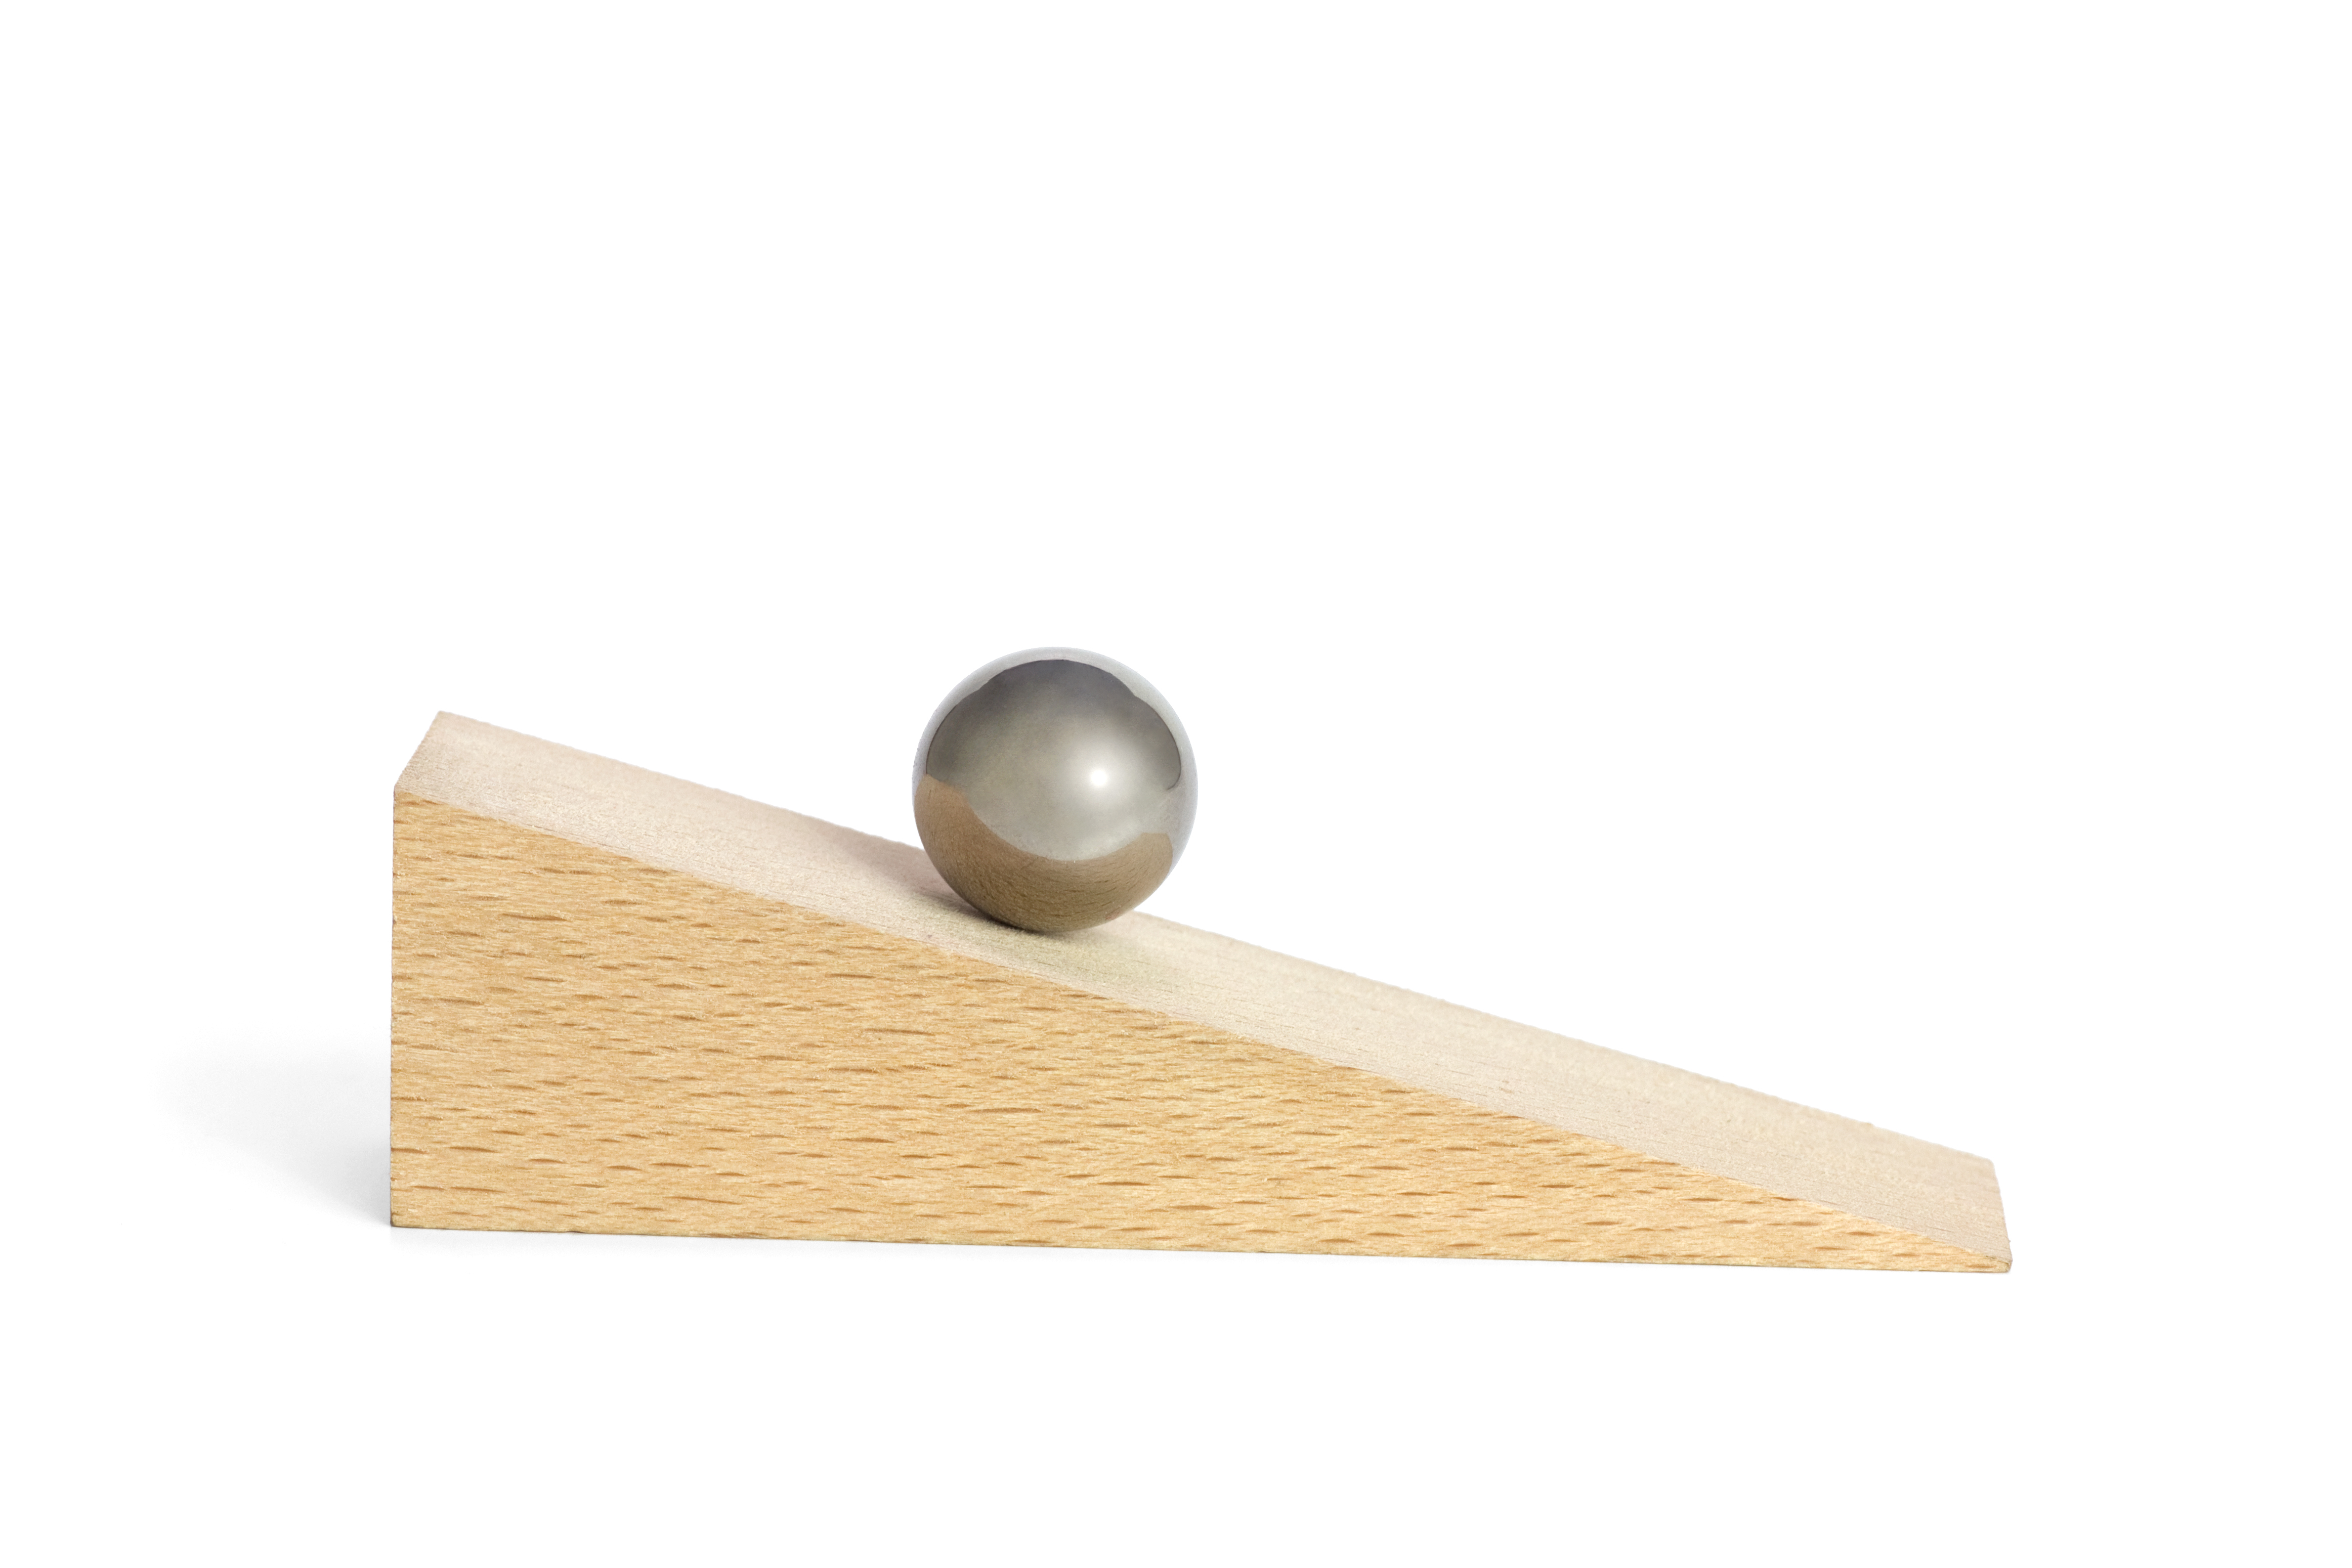 ball on inclined plane